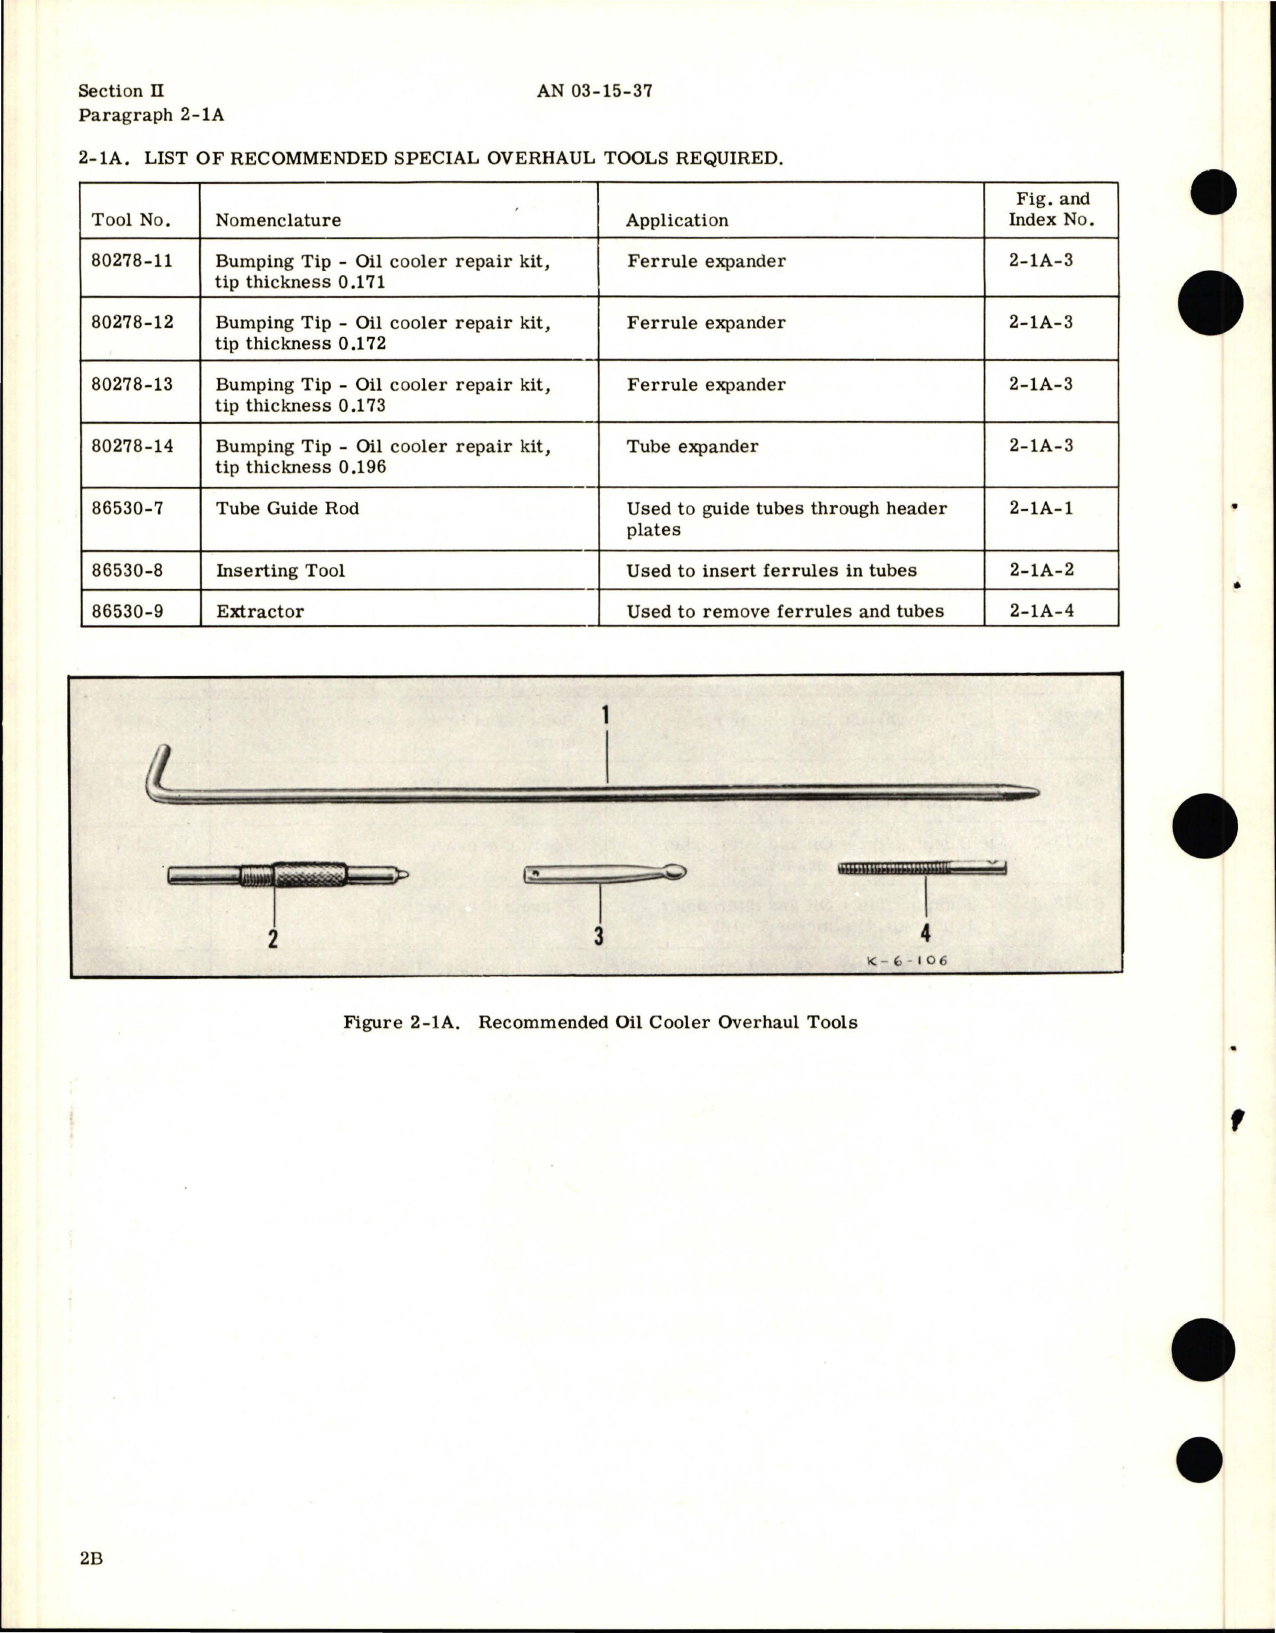 Sample page 8 from AirCorps Library document: Overhaul Instructions for Oil Temperature Regulators Oil Coolers Valves